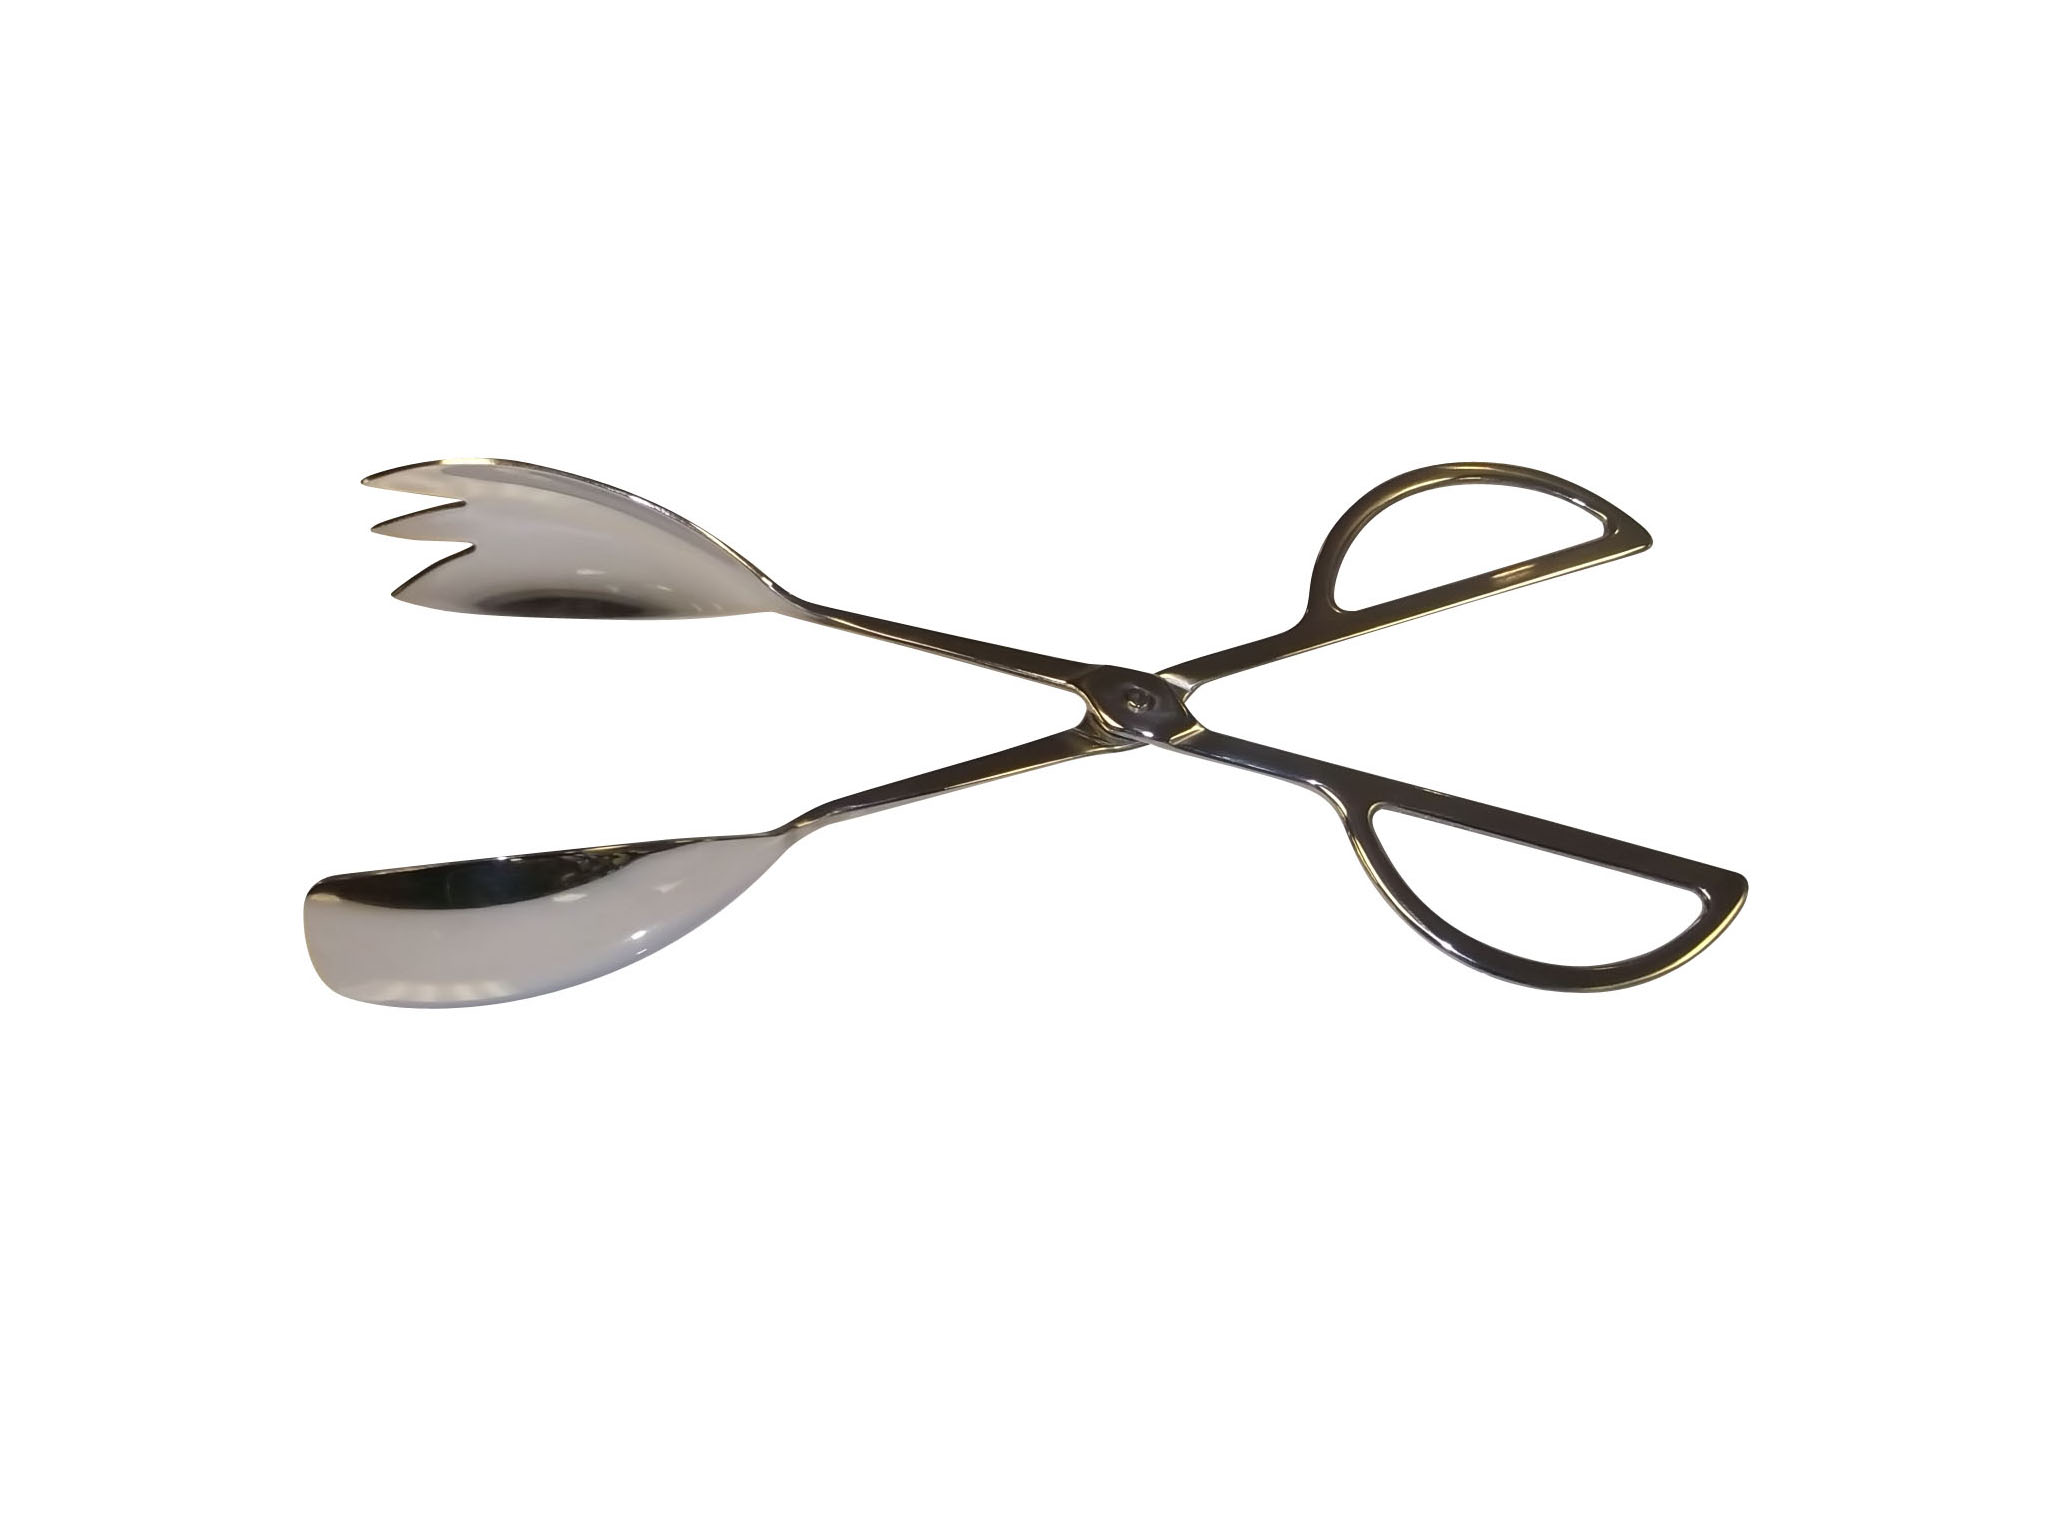 S/S SPOON & FORK TONG - Premium Quality